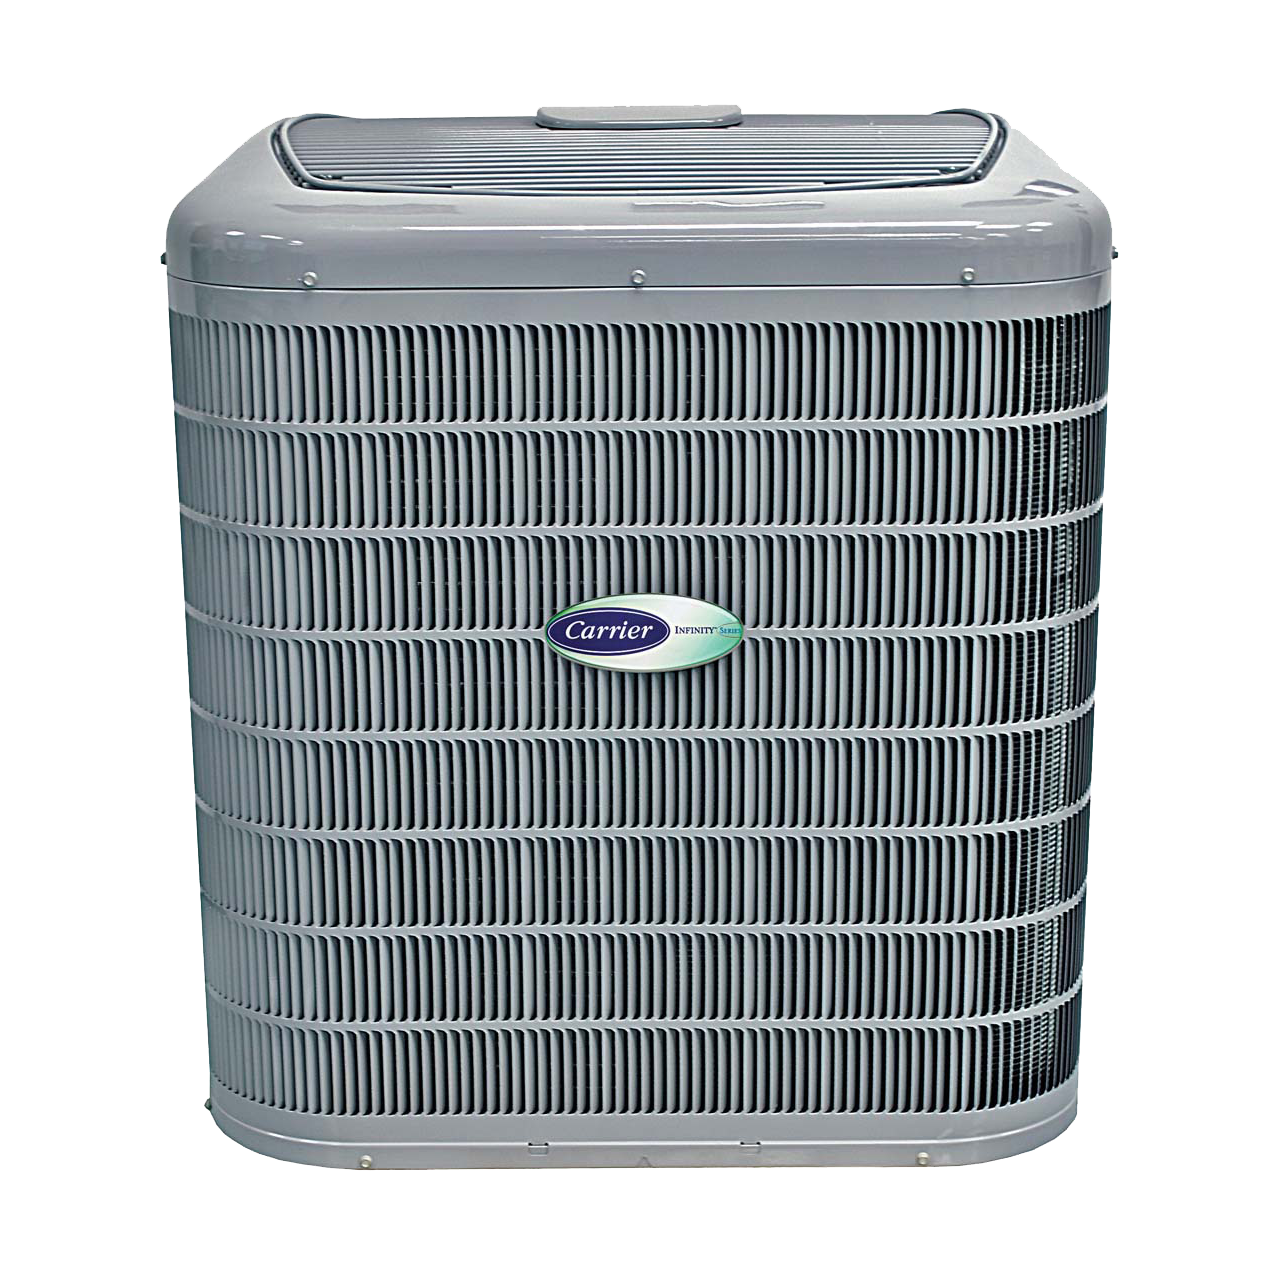 infinity-21-central-air-conditioner-24AN